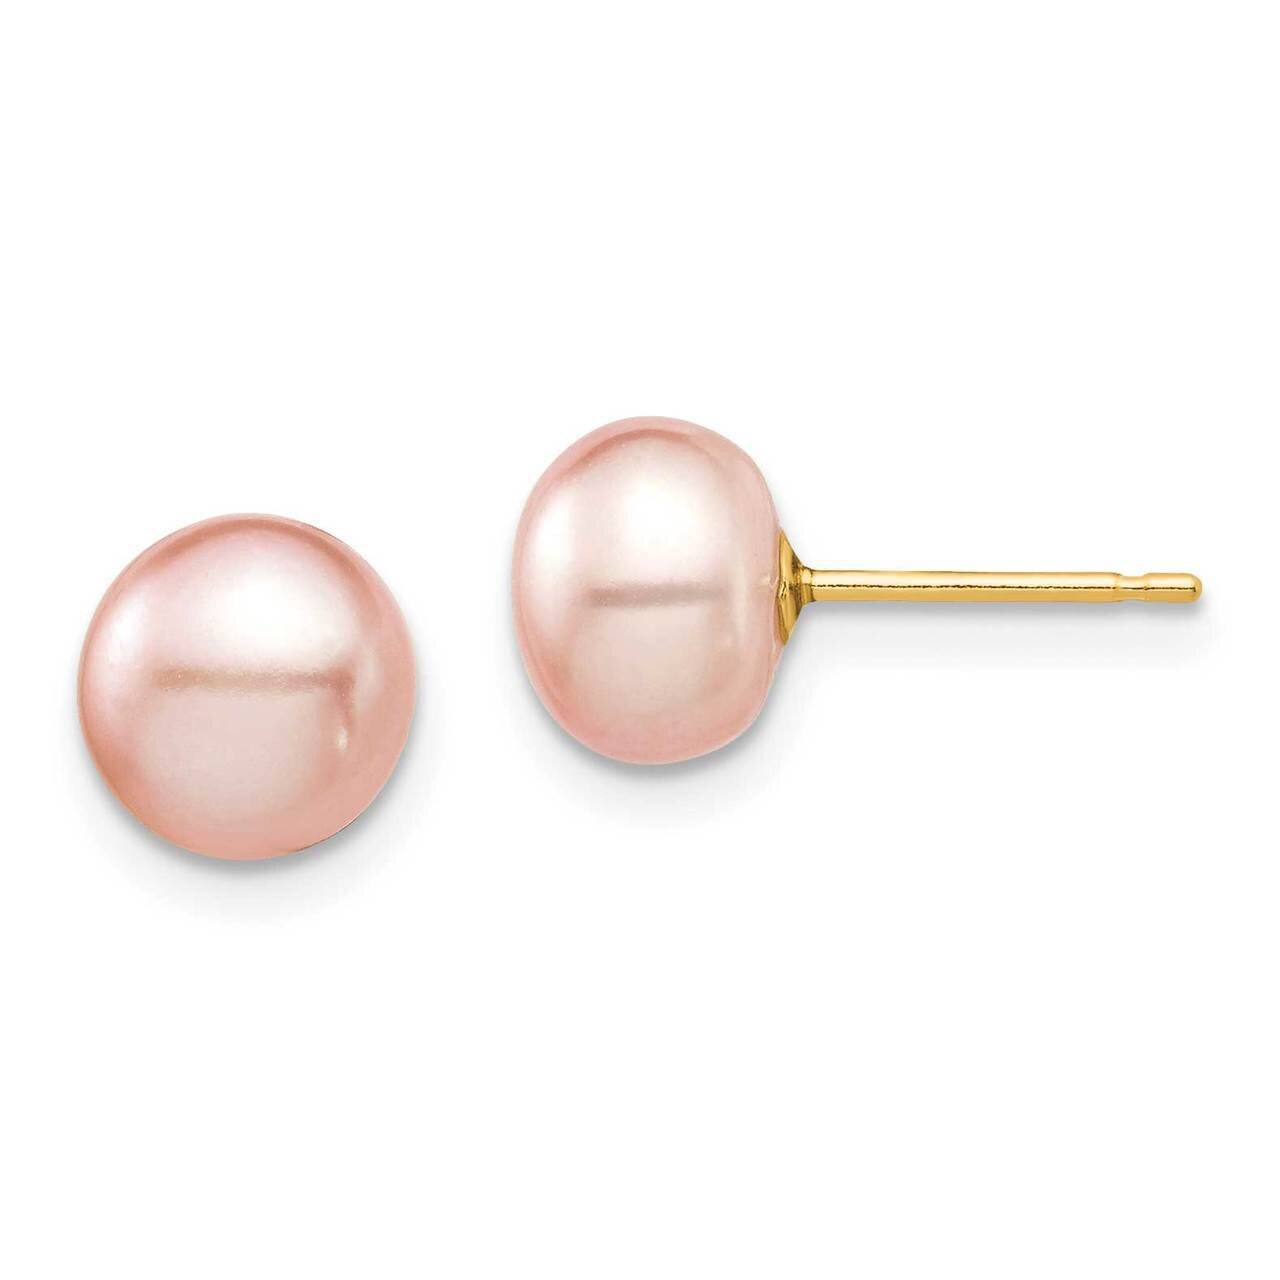 7-8mm Pink Button Freshwater Cultured Pearl Stud Post Earrings 14k Gold SE2933